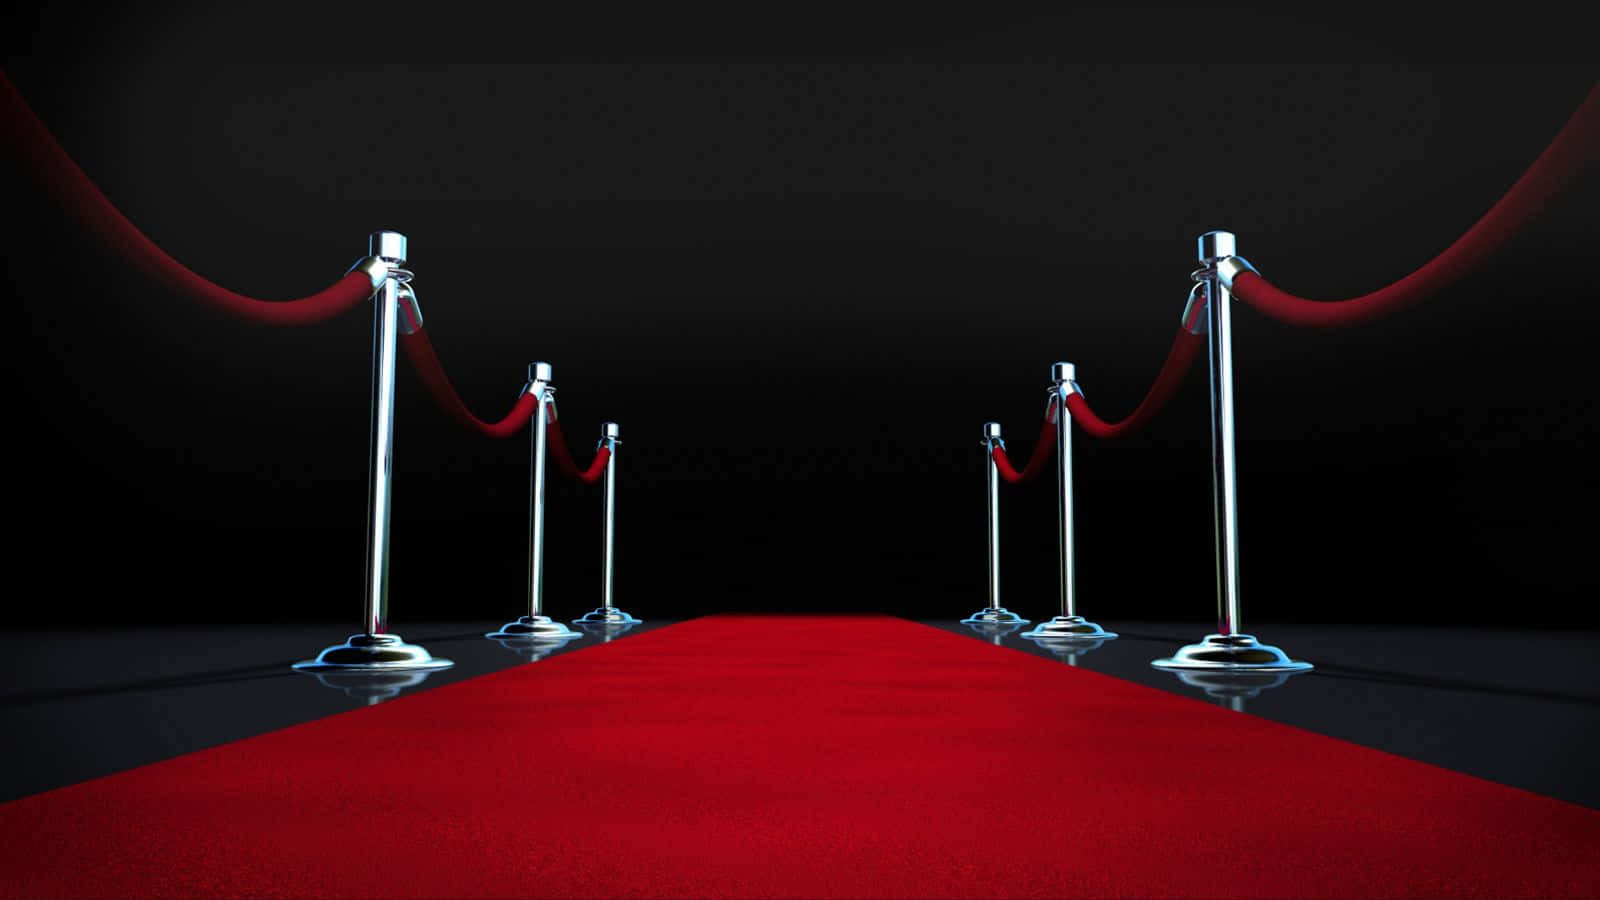 “Striking red carpet illuminated with dazzling lights” Wallpaper